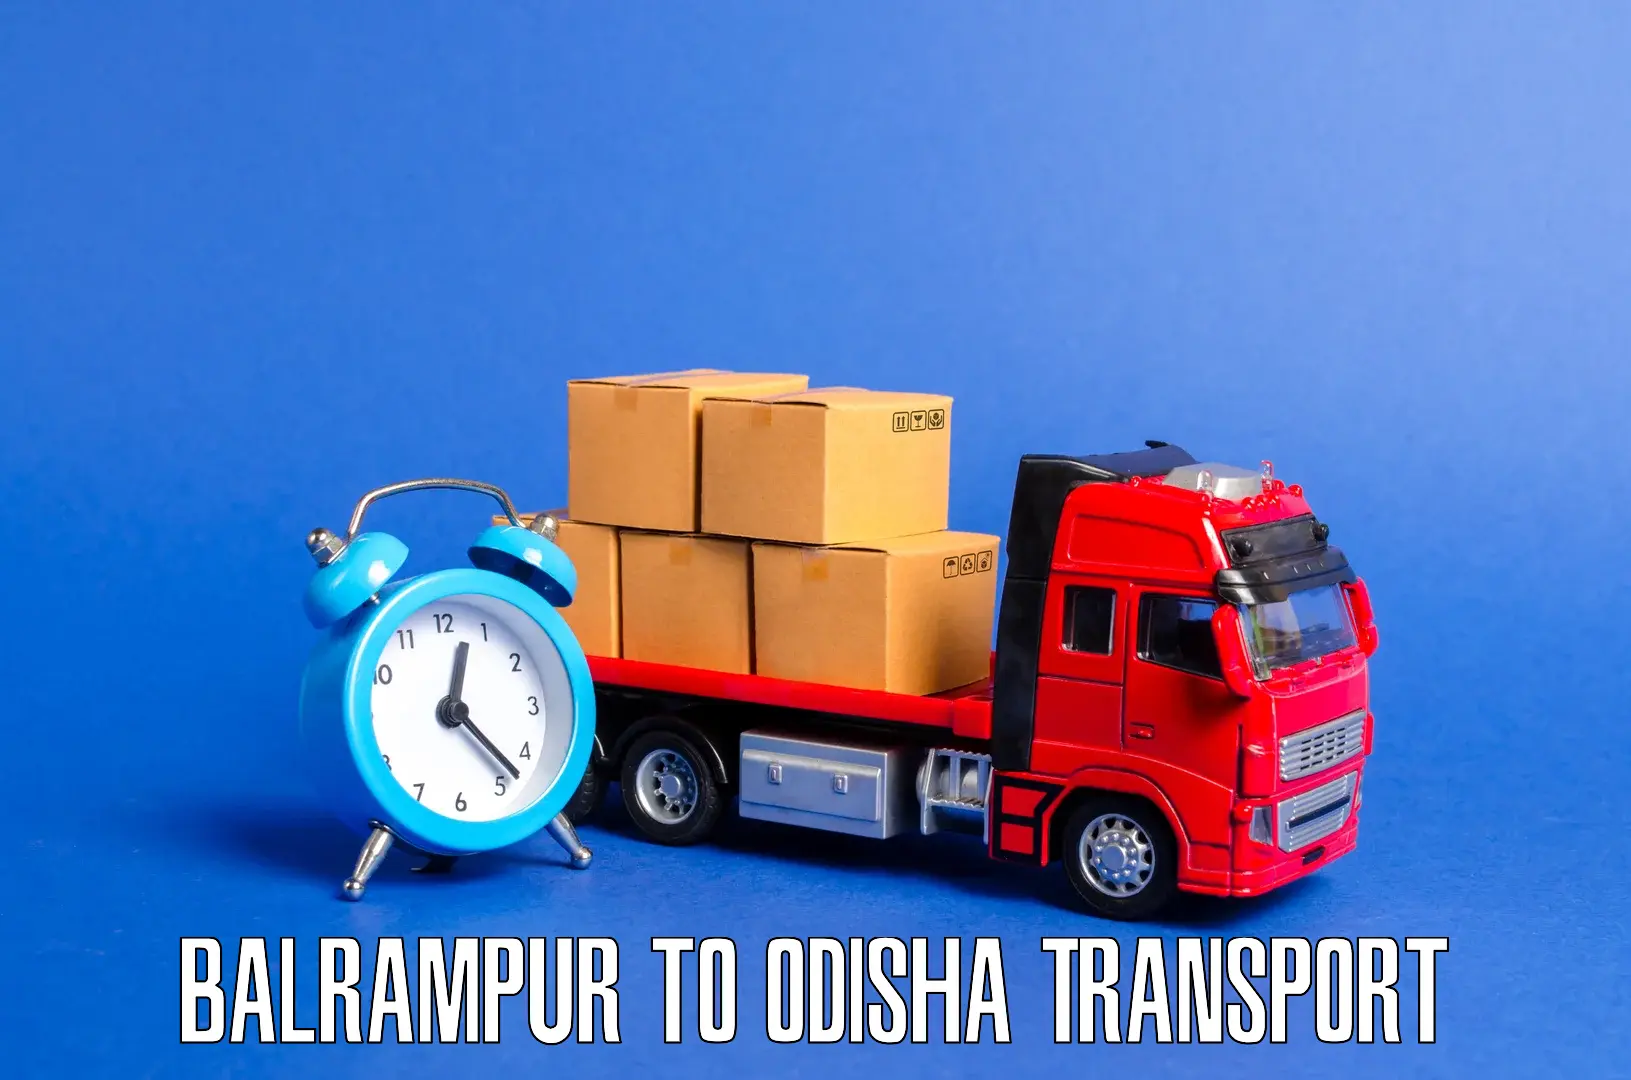 Nationwide transport services Balrampur to Dhenkanal